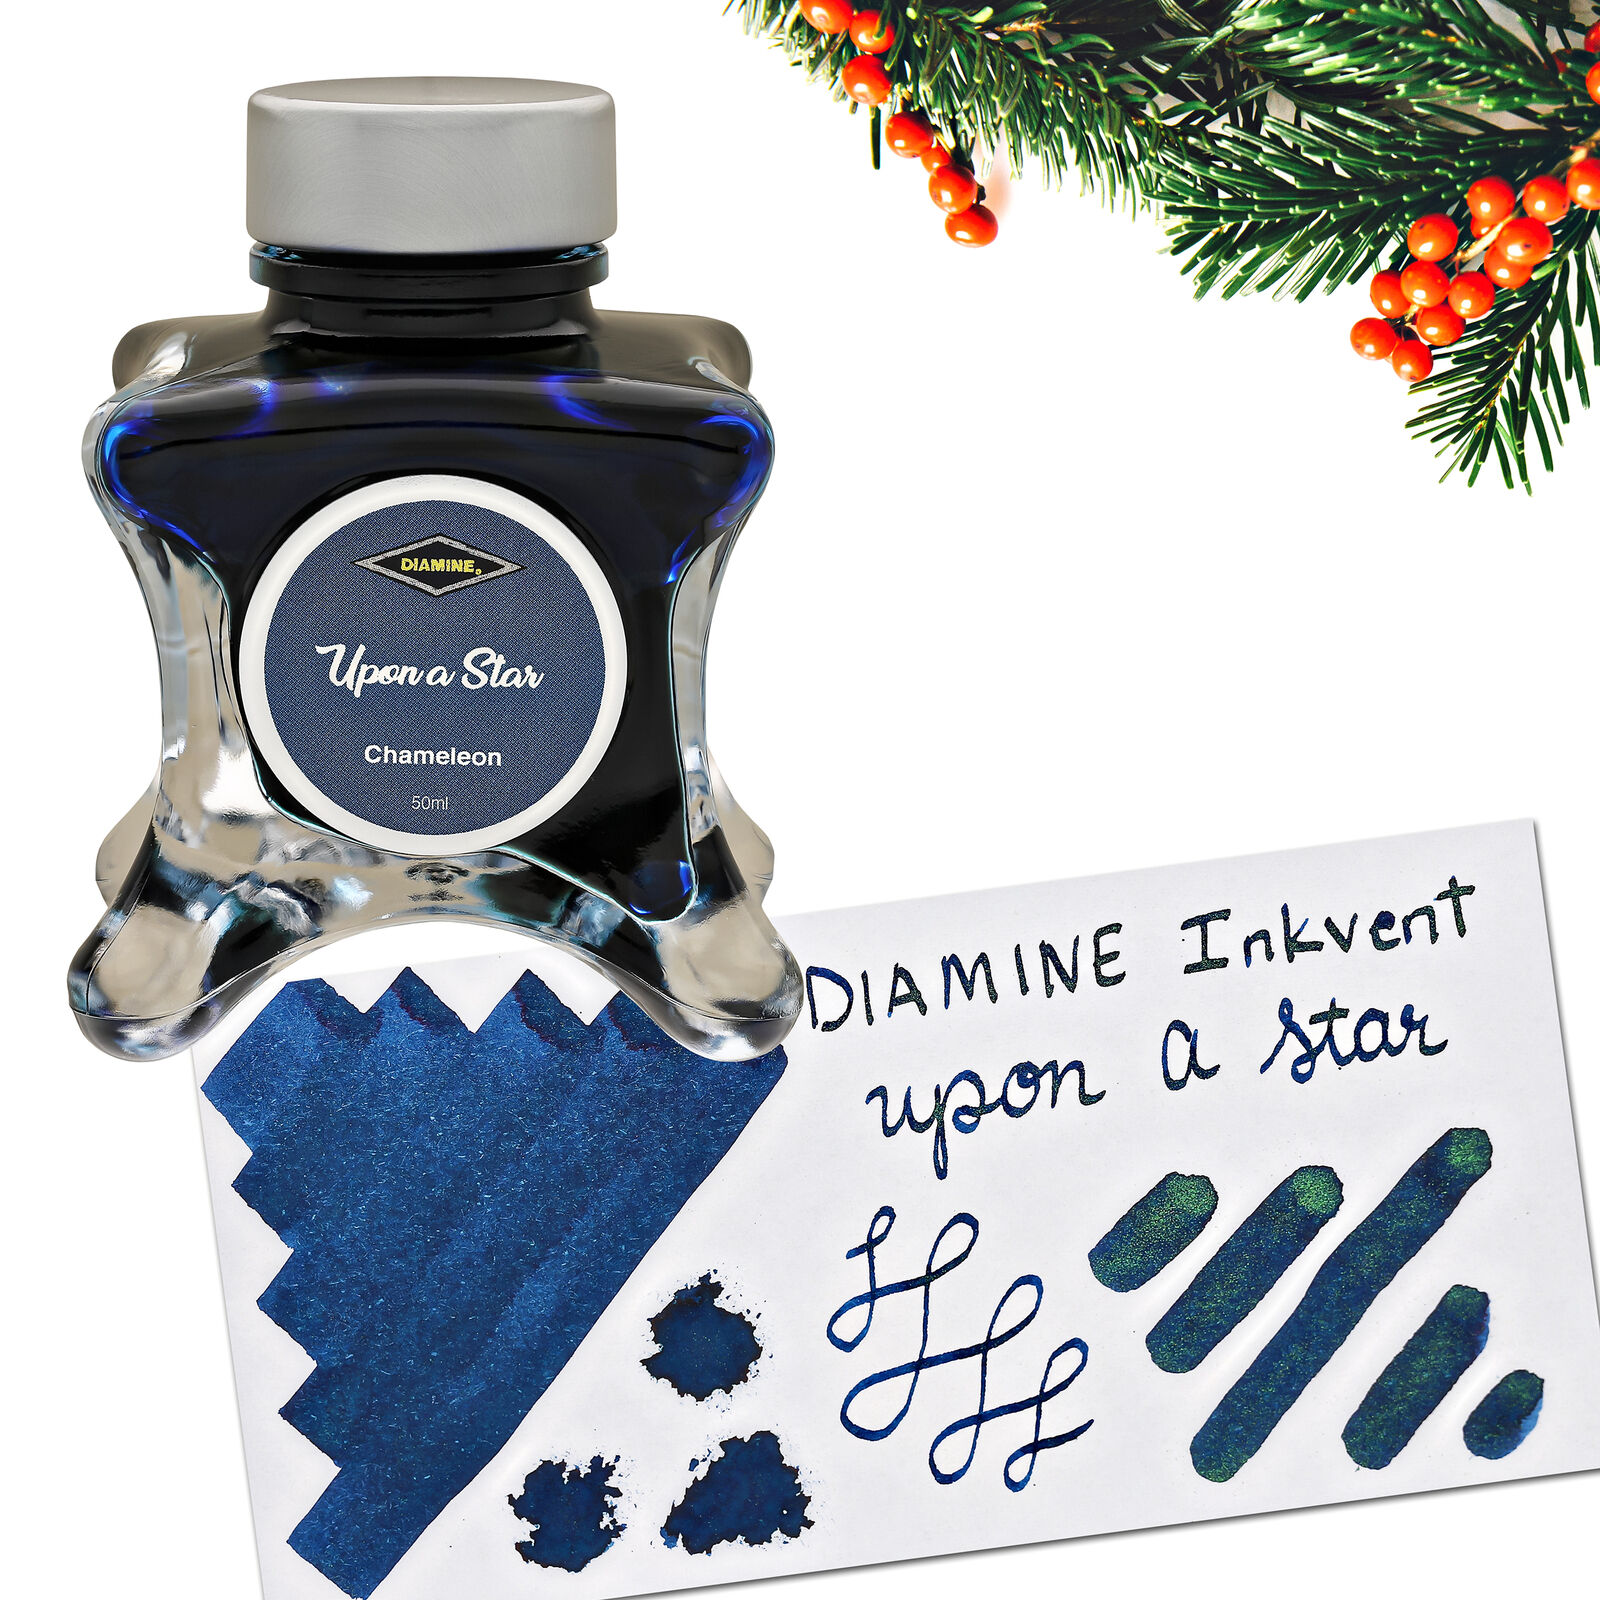 Diamine Inkvent Green Edition Chameleon Bottled Ink in Upon a Star - 50 mL - NEW